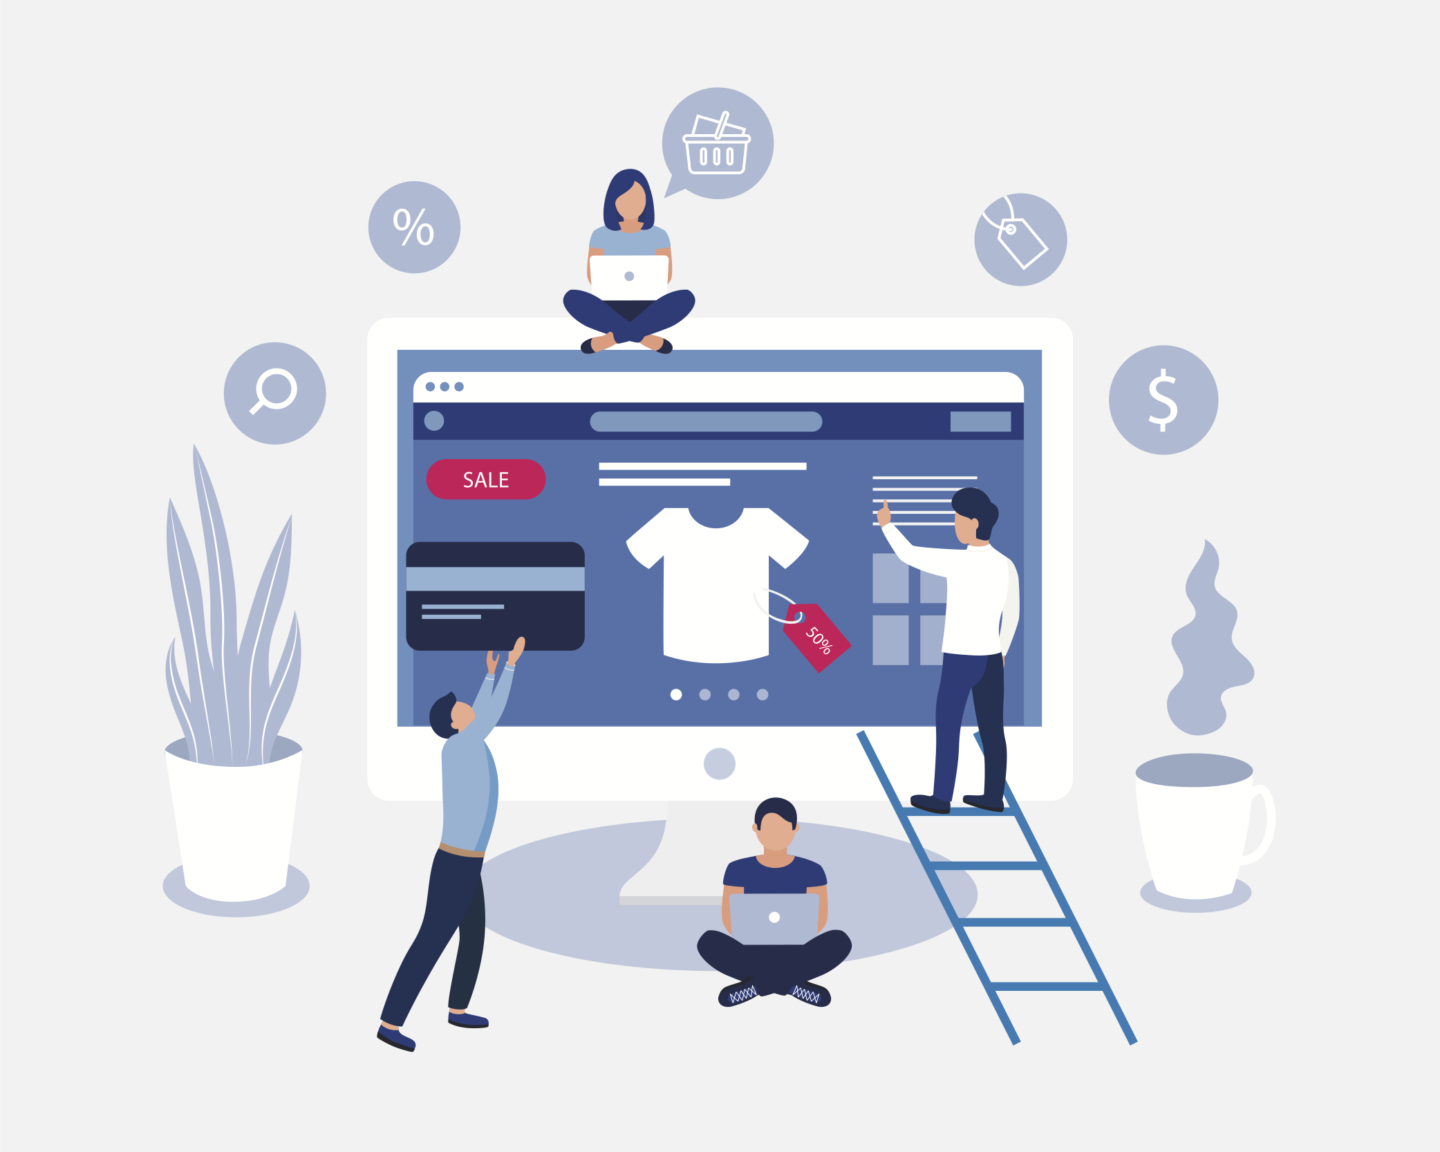 6 Marketing Automation Tips for eCommerce Companies in 2021